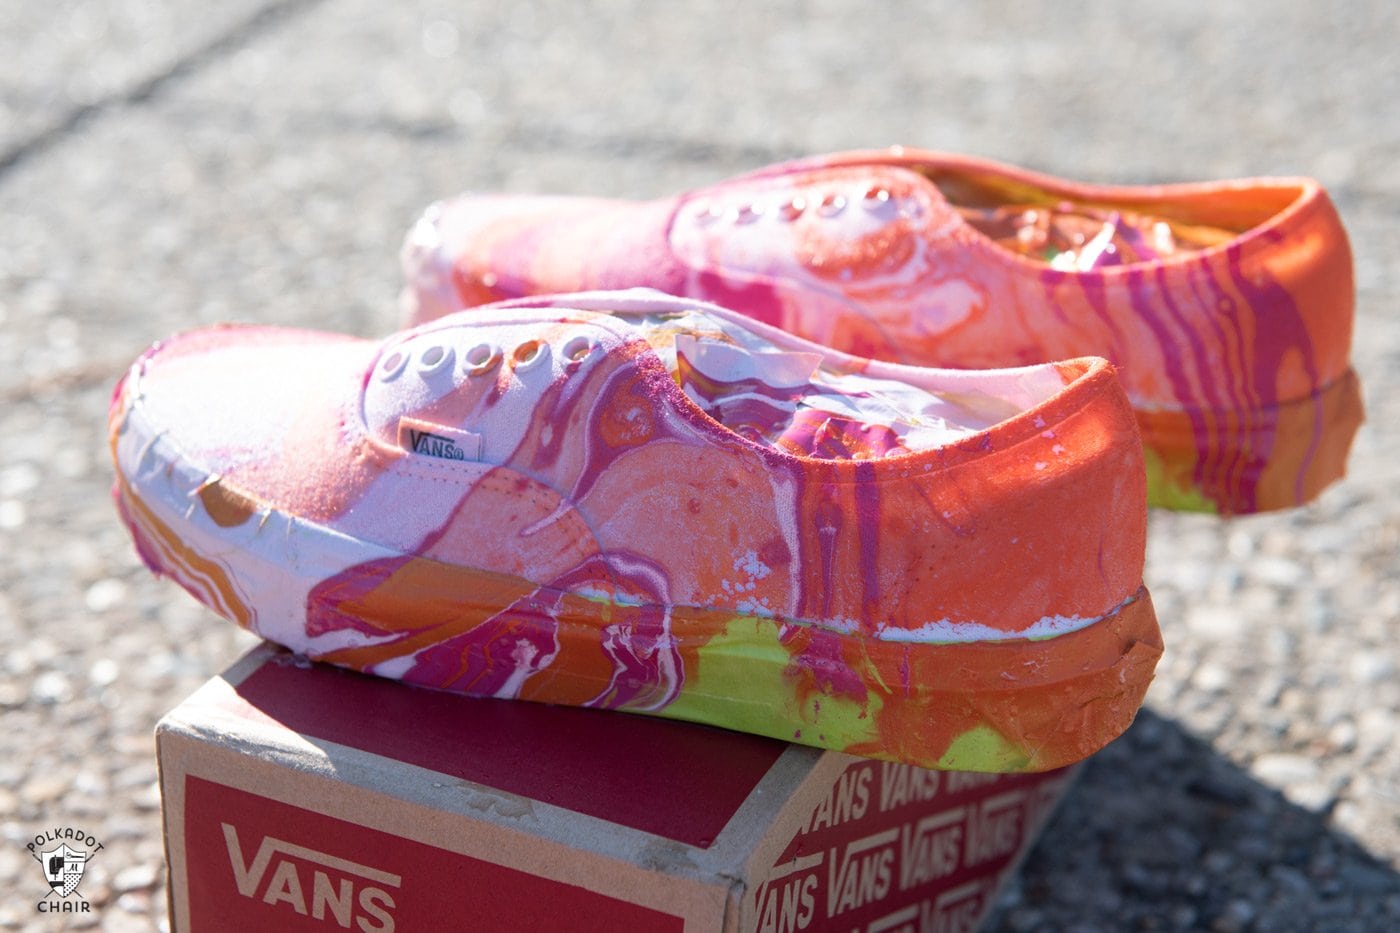 White orange and pink hydro dipped vans drying in the sun on a shoe box after being dipped.